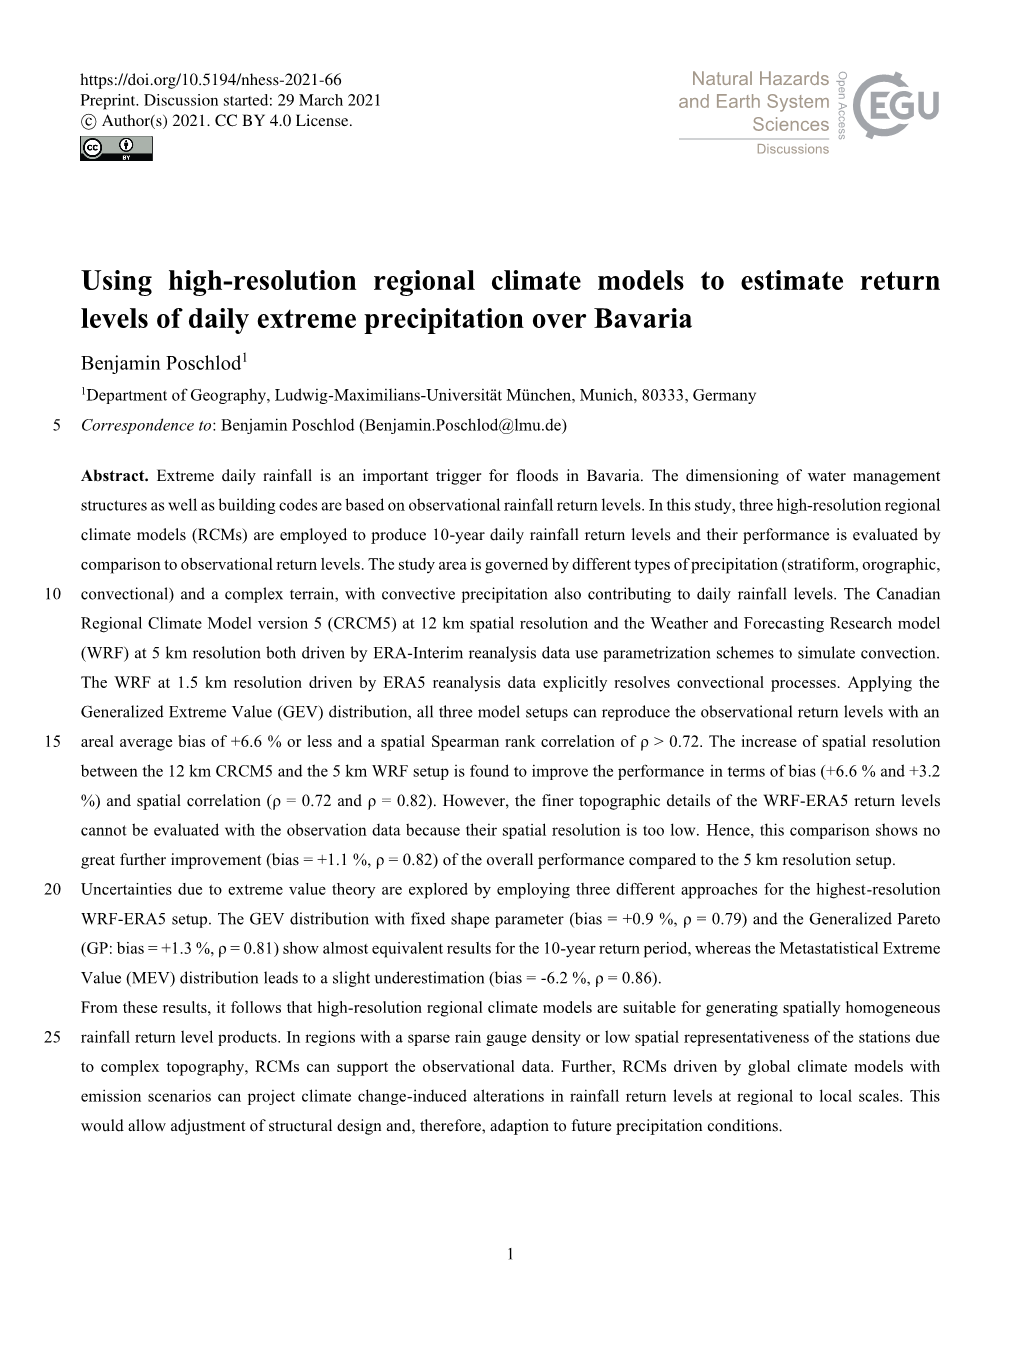 Using High-Resolution Regional Climate Models to Estimate Return Levels of Daily Extreme Precipitation Over Bavaria